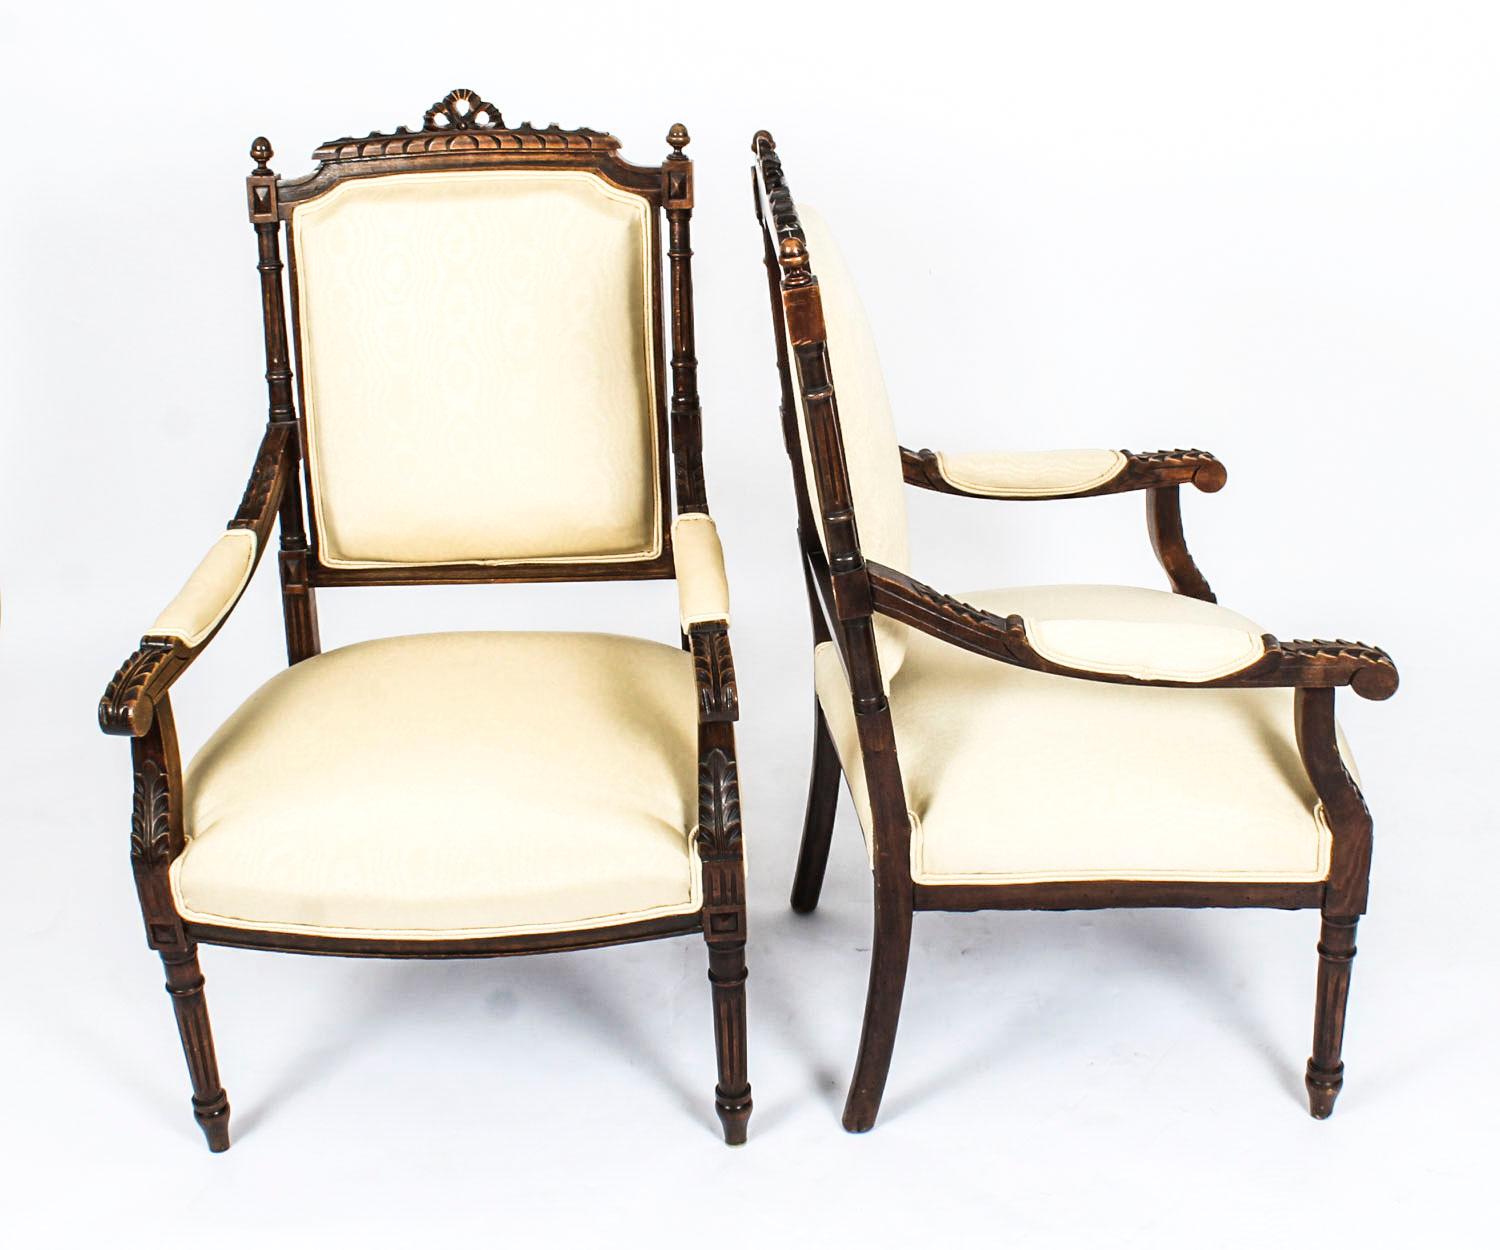 This is a beautiful and comfortable pair of antique French armchairs, circa 1880 in date.

They have been exquisitely hand carved in classical style with padded back supports, acanthus carved arms and elegant fluted forelegs, and they have just